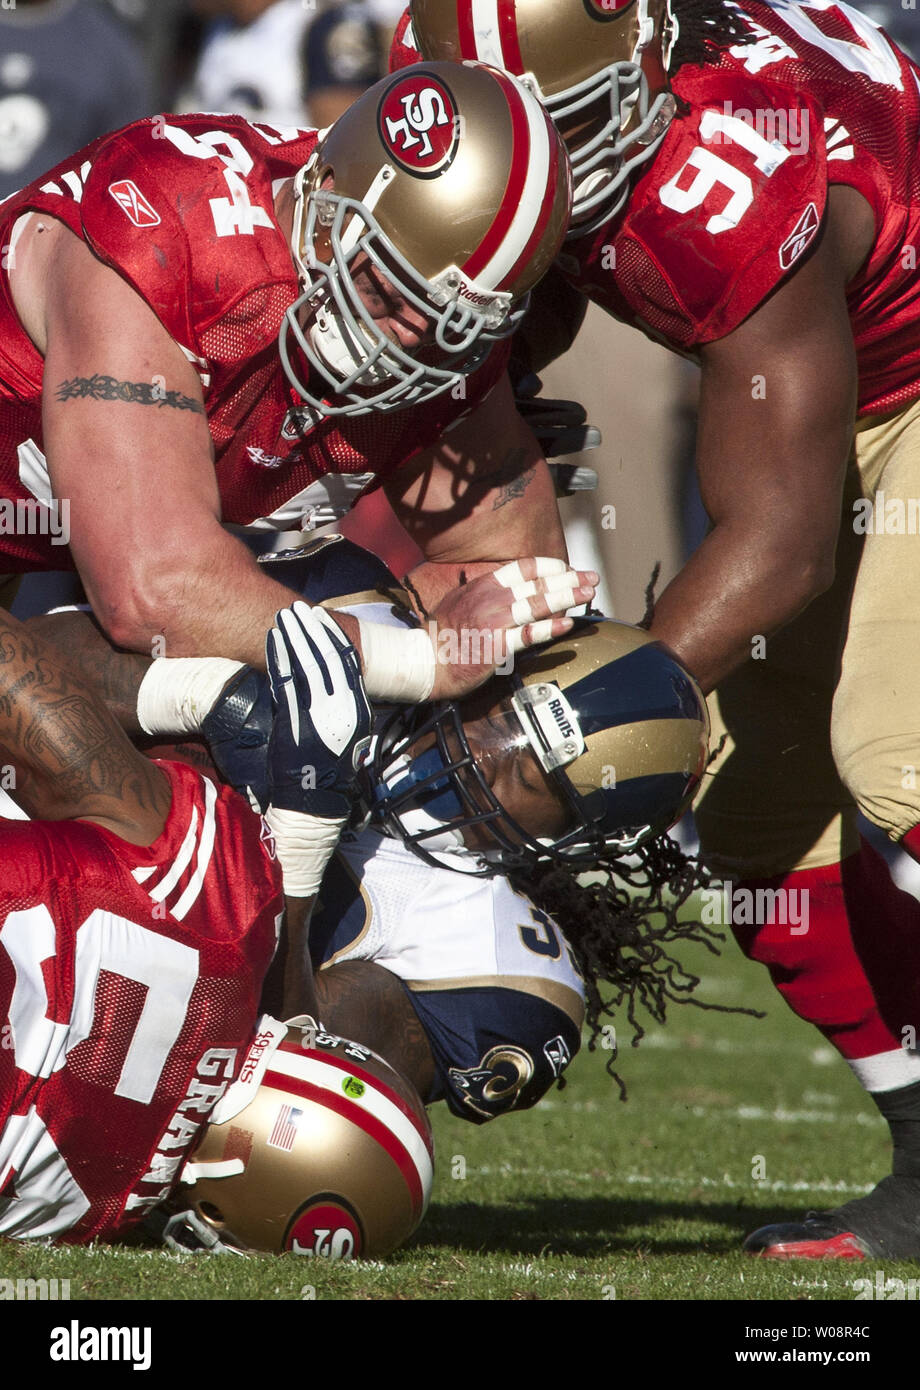 St. Louis Rams Steven Jackson (39) is slamed into the ground by San Francisco 49ers Justin Smith (94) at Candlestick Park in San Francisco on December 4, 2011. The 49ers defeated the Rams 26-0 to clinch the NFC West.  UPI/Terry Schmitt Stock Photo